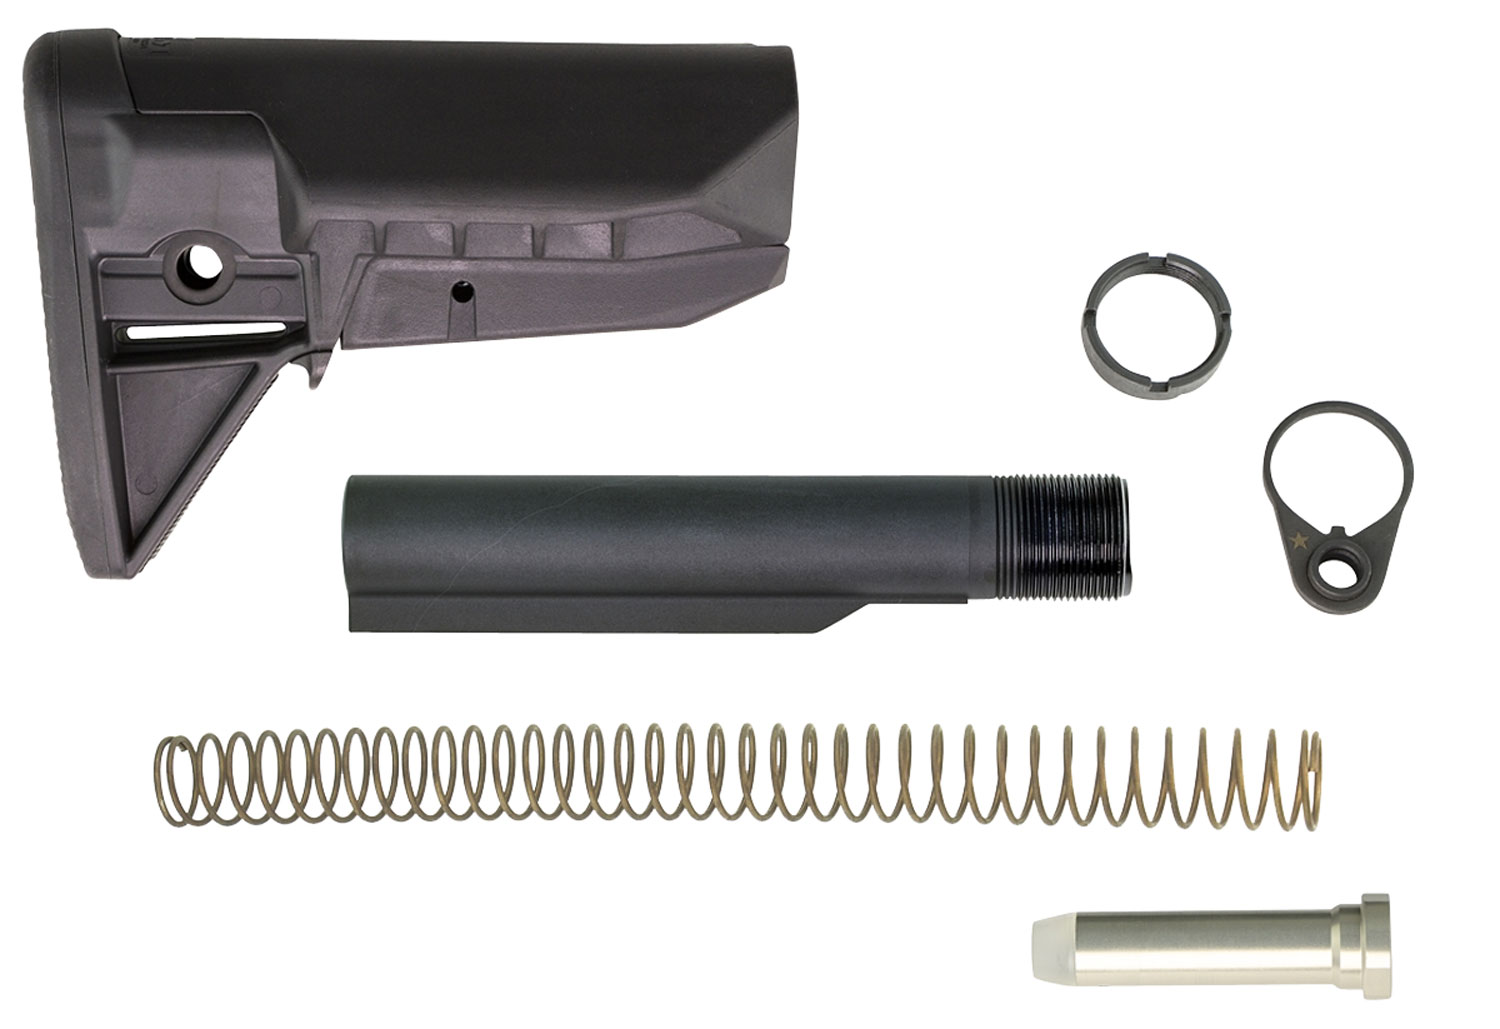 BCM GFSKMOD0SPMD BCMGunfighter Mod 0 Stock Kit Black Synthetic with SOPMOD Widebody Cheekweld for AR-15